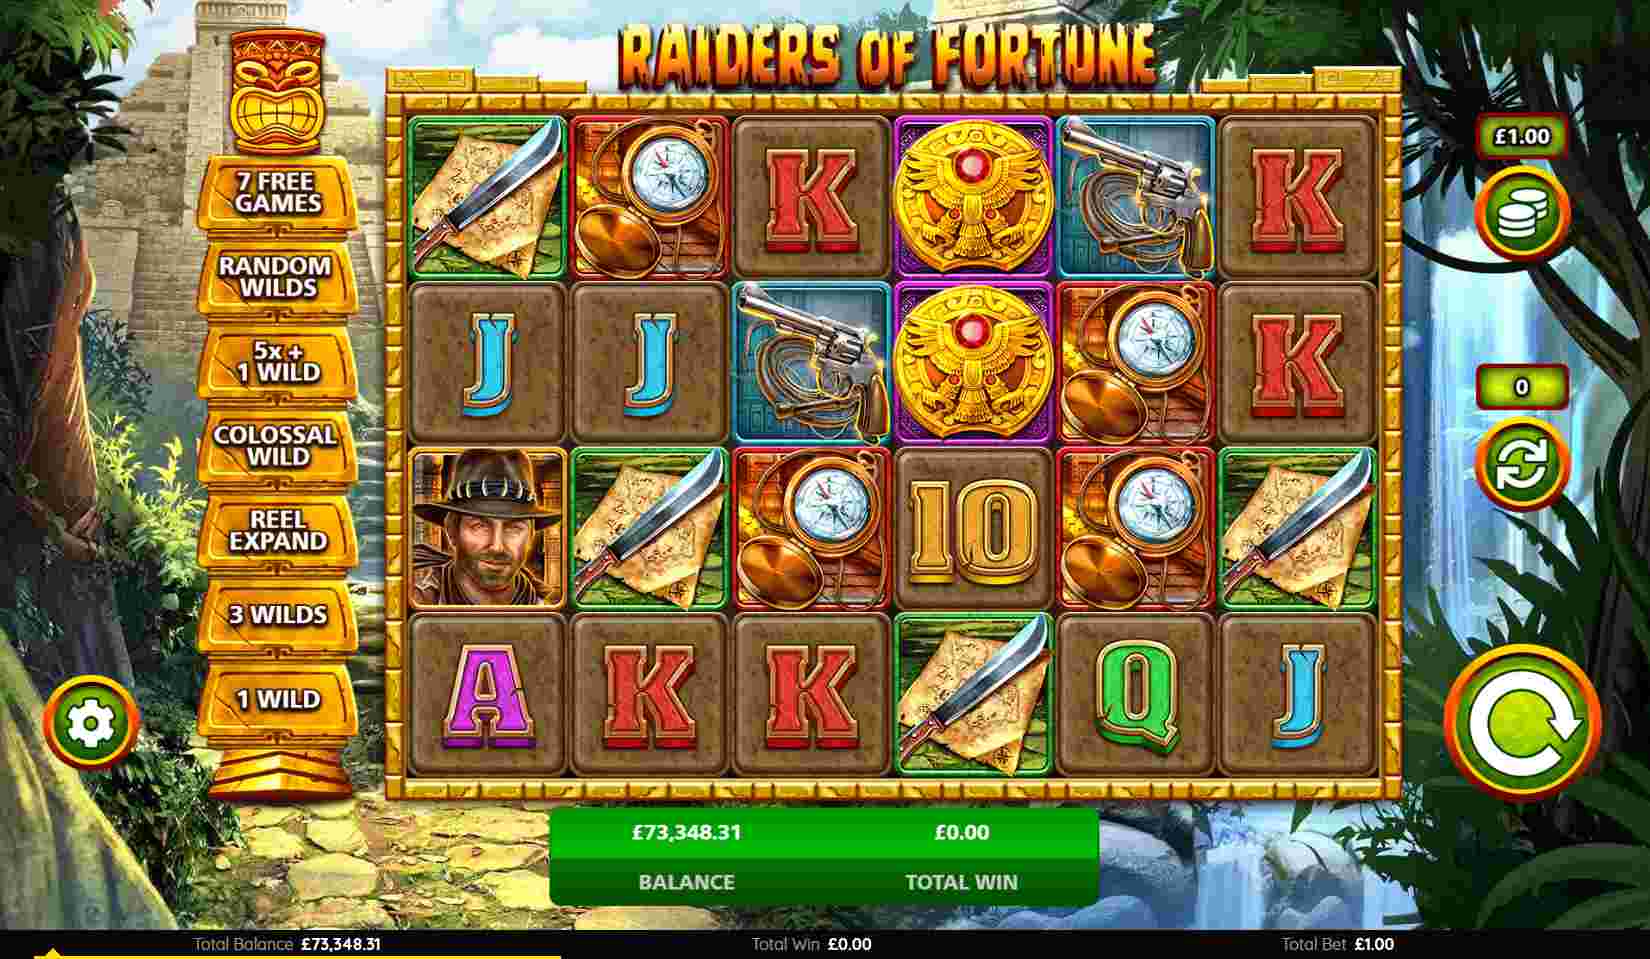 Raiders of Fortune Base Game